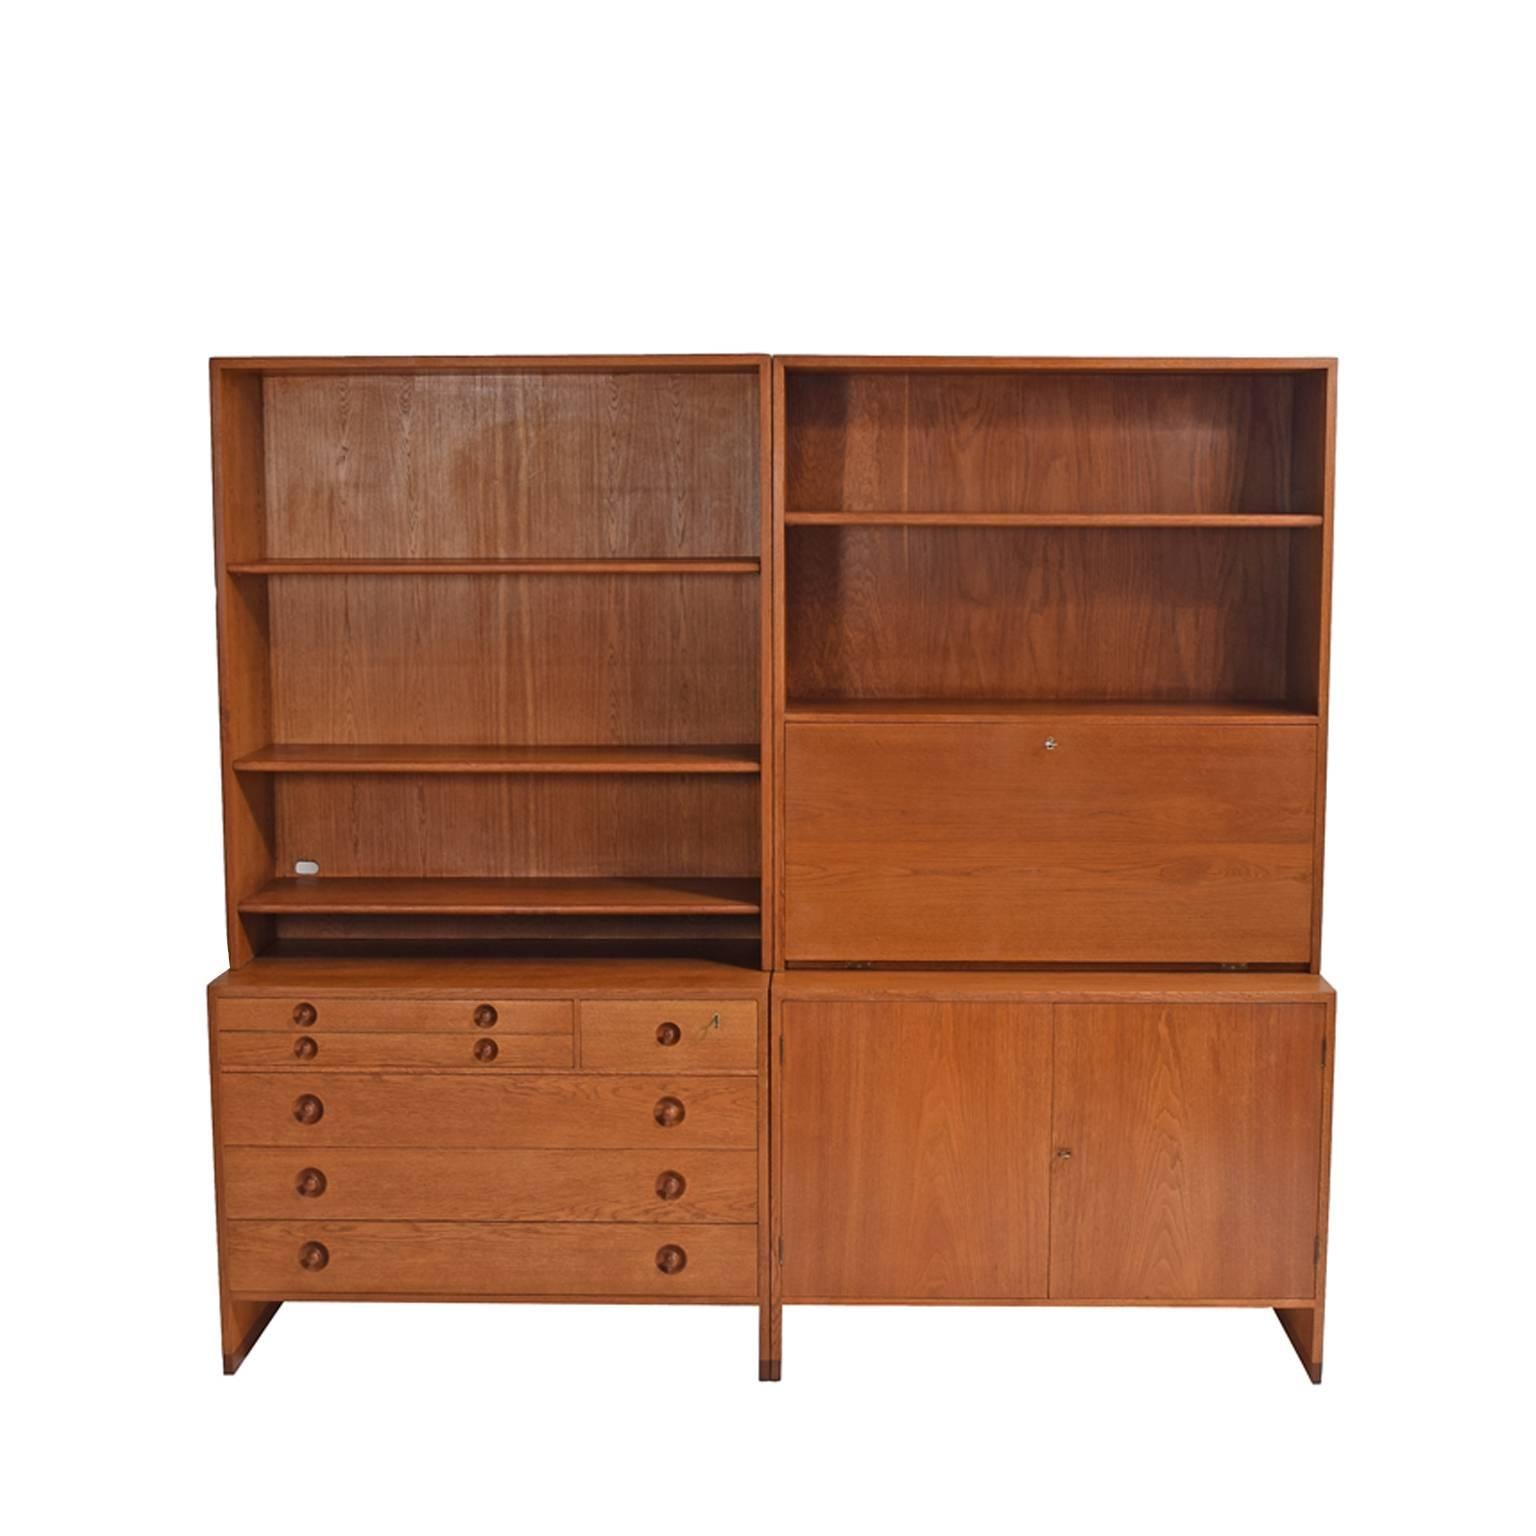 Golden oak wall unit design By Hans J. Wegner In the 1950s for Ry Møbler, bottom units one chest of drawers and the second unit with two doors [two shelves], top units open book shelve and drop desk with light,.